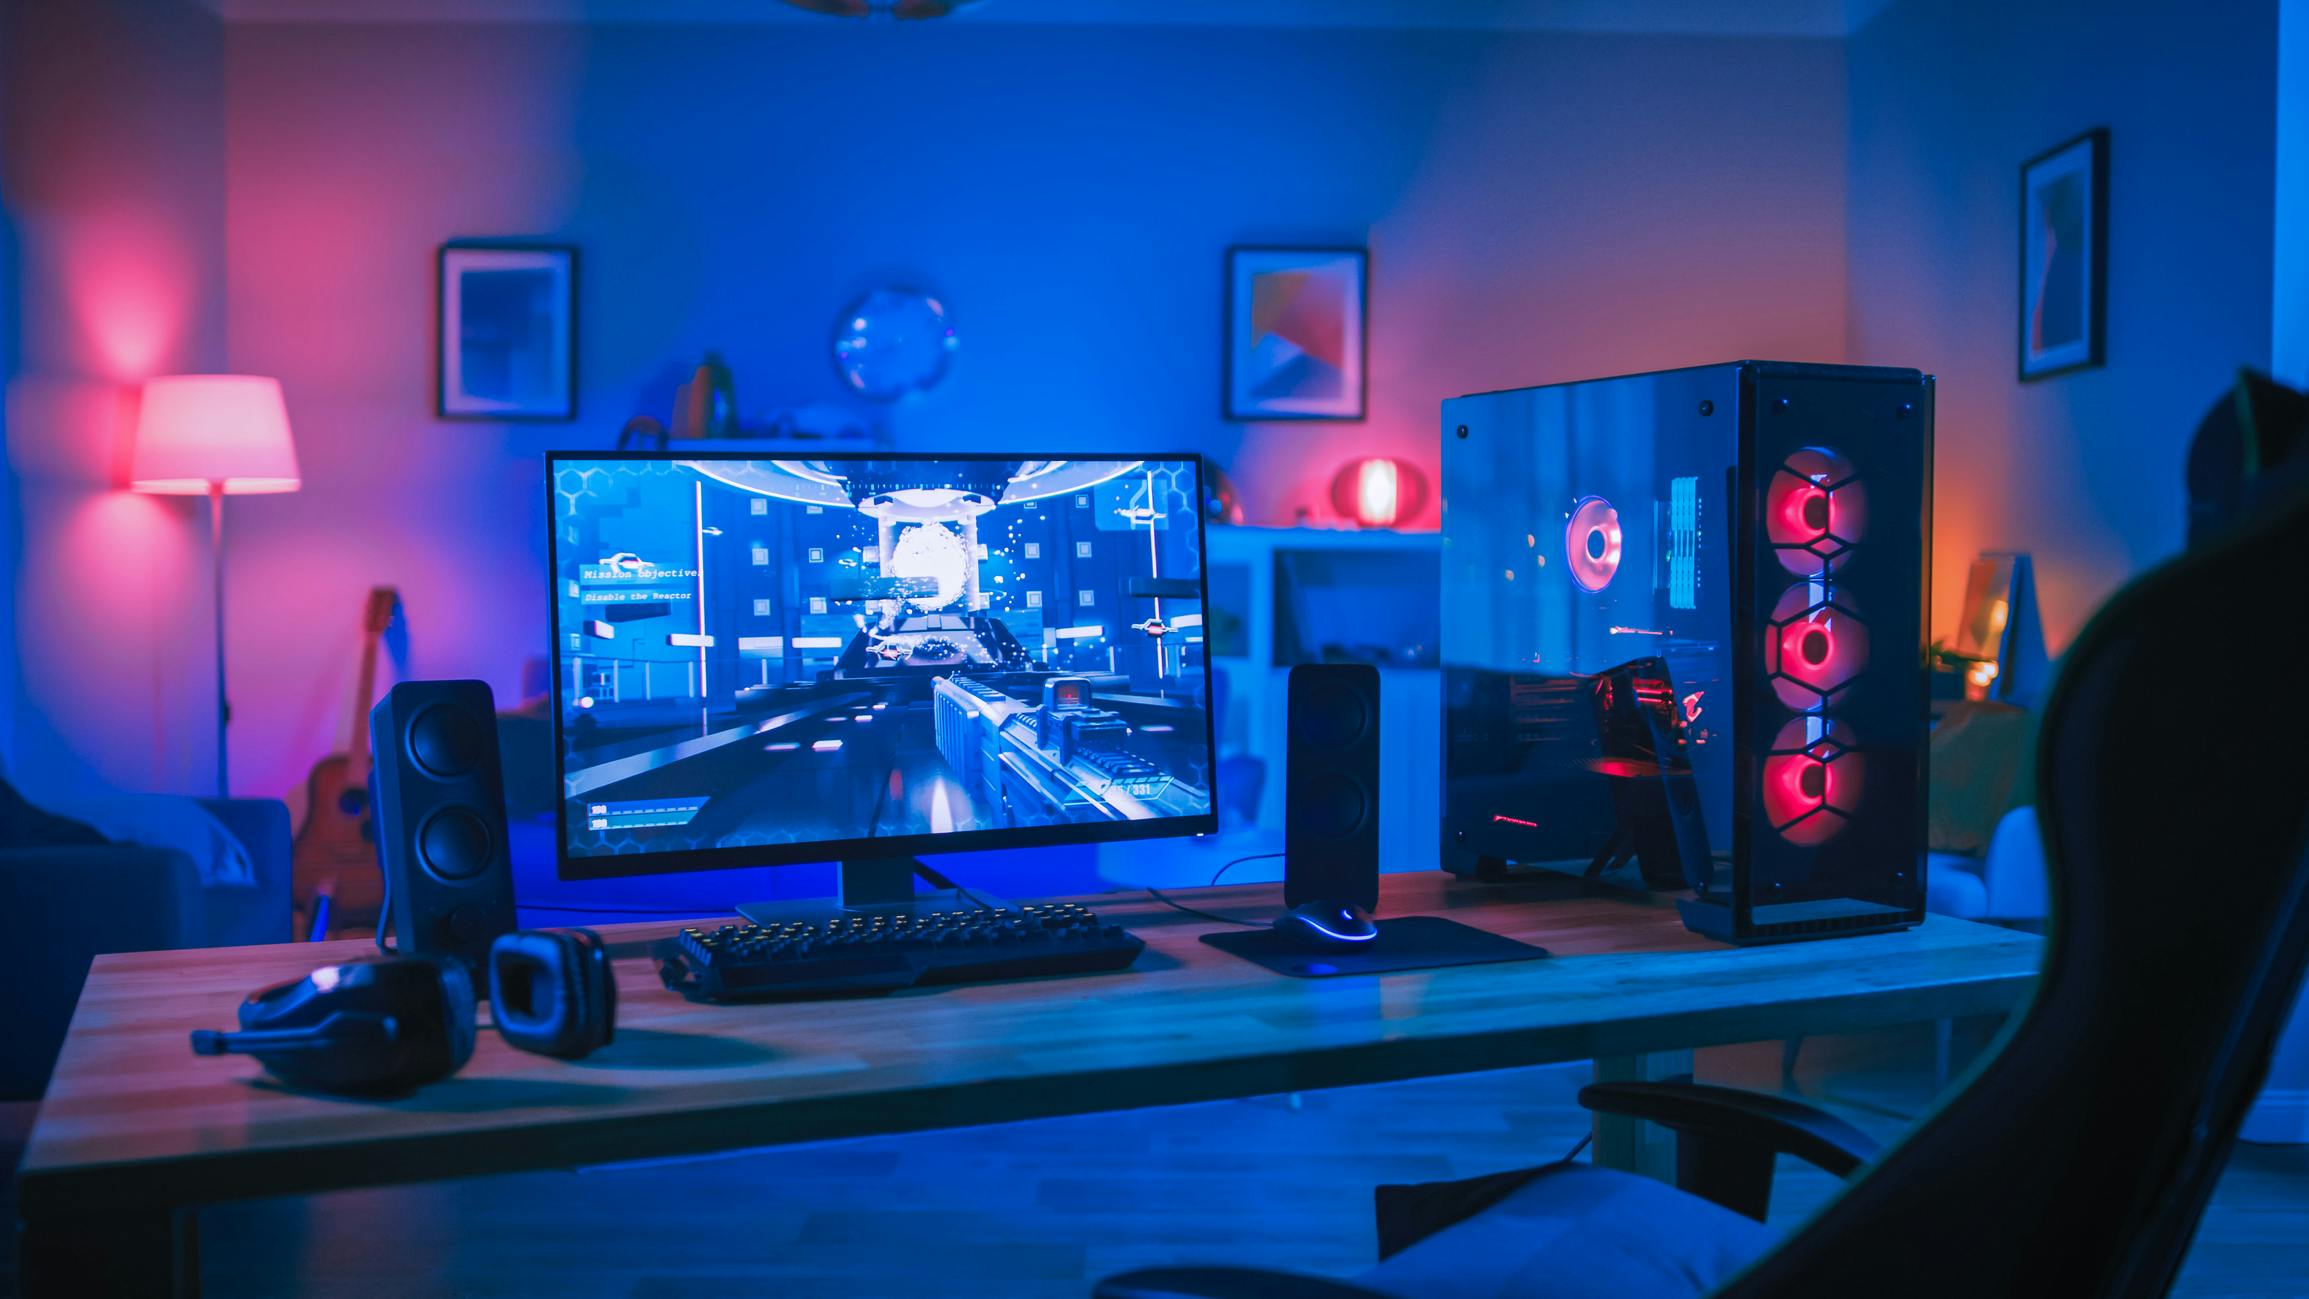 A gaming computer, monitor, speakers, and headphones on a desk